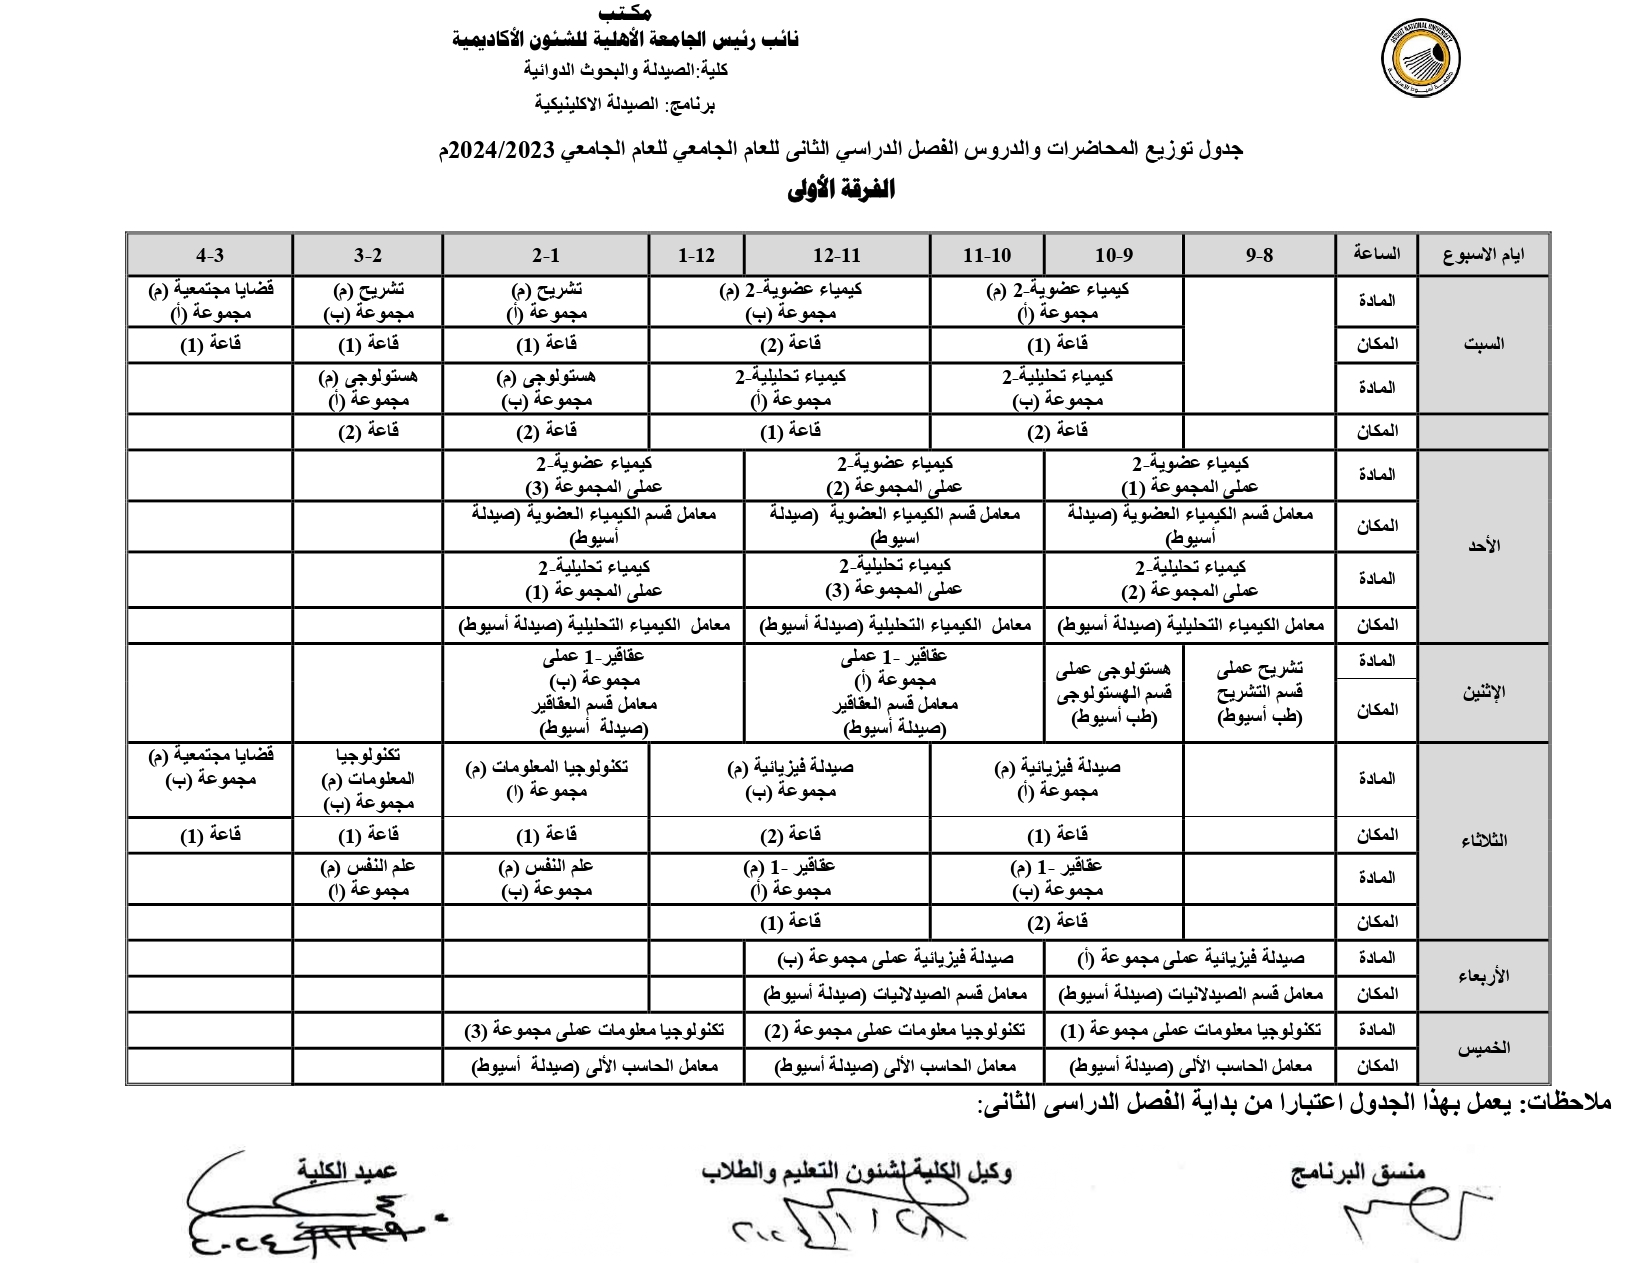 Schedule of lectures and lessons for the first year of National University for the second semester of the academic year 2023/2024